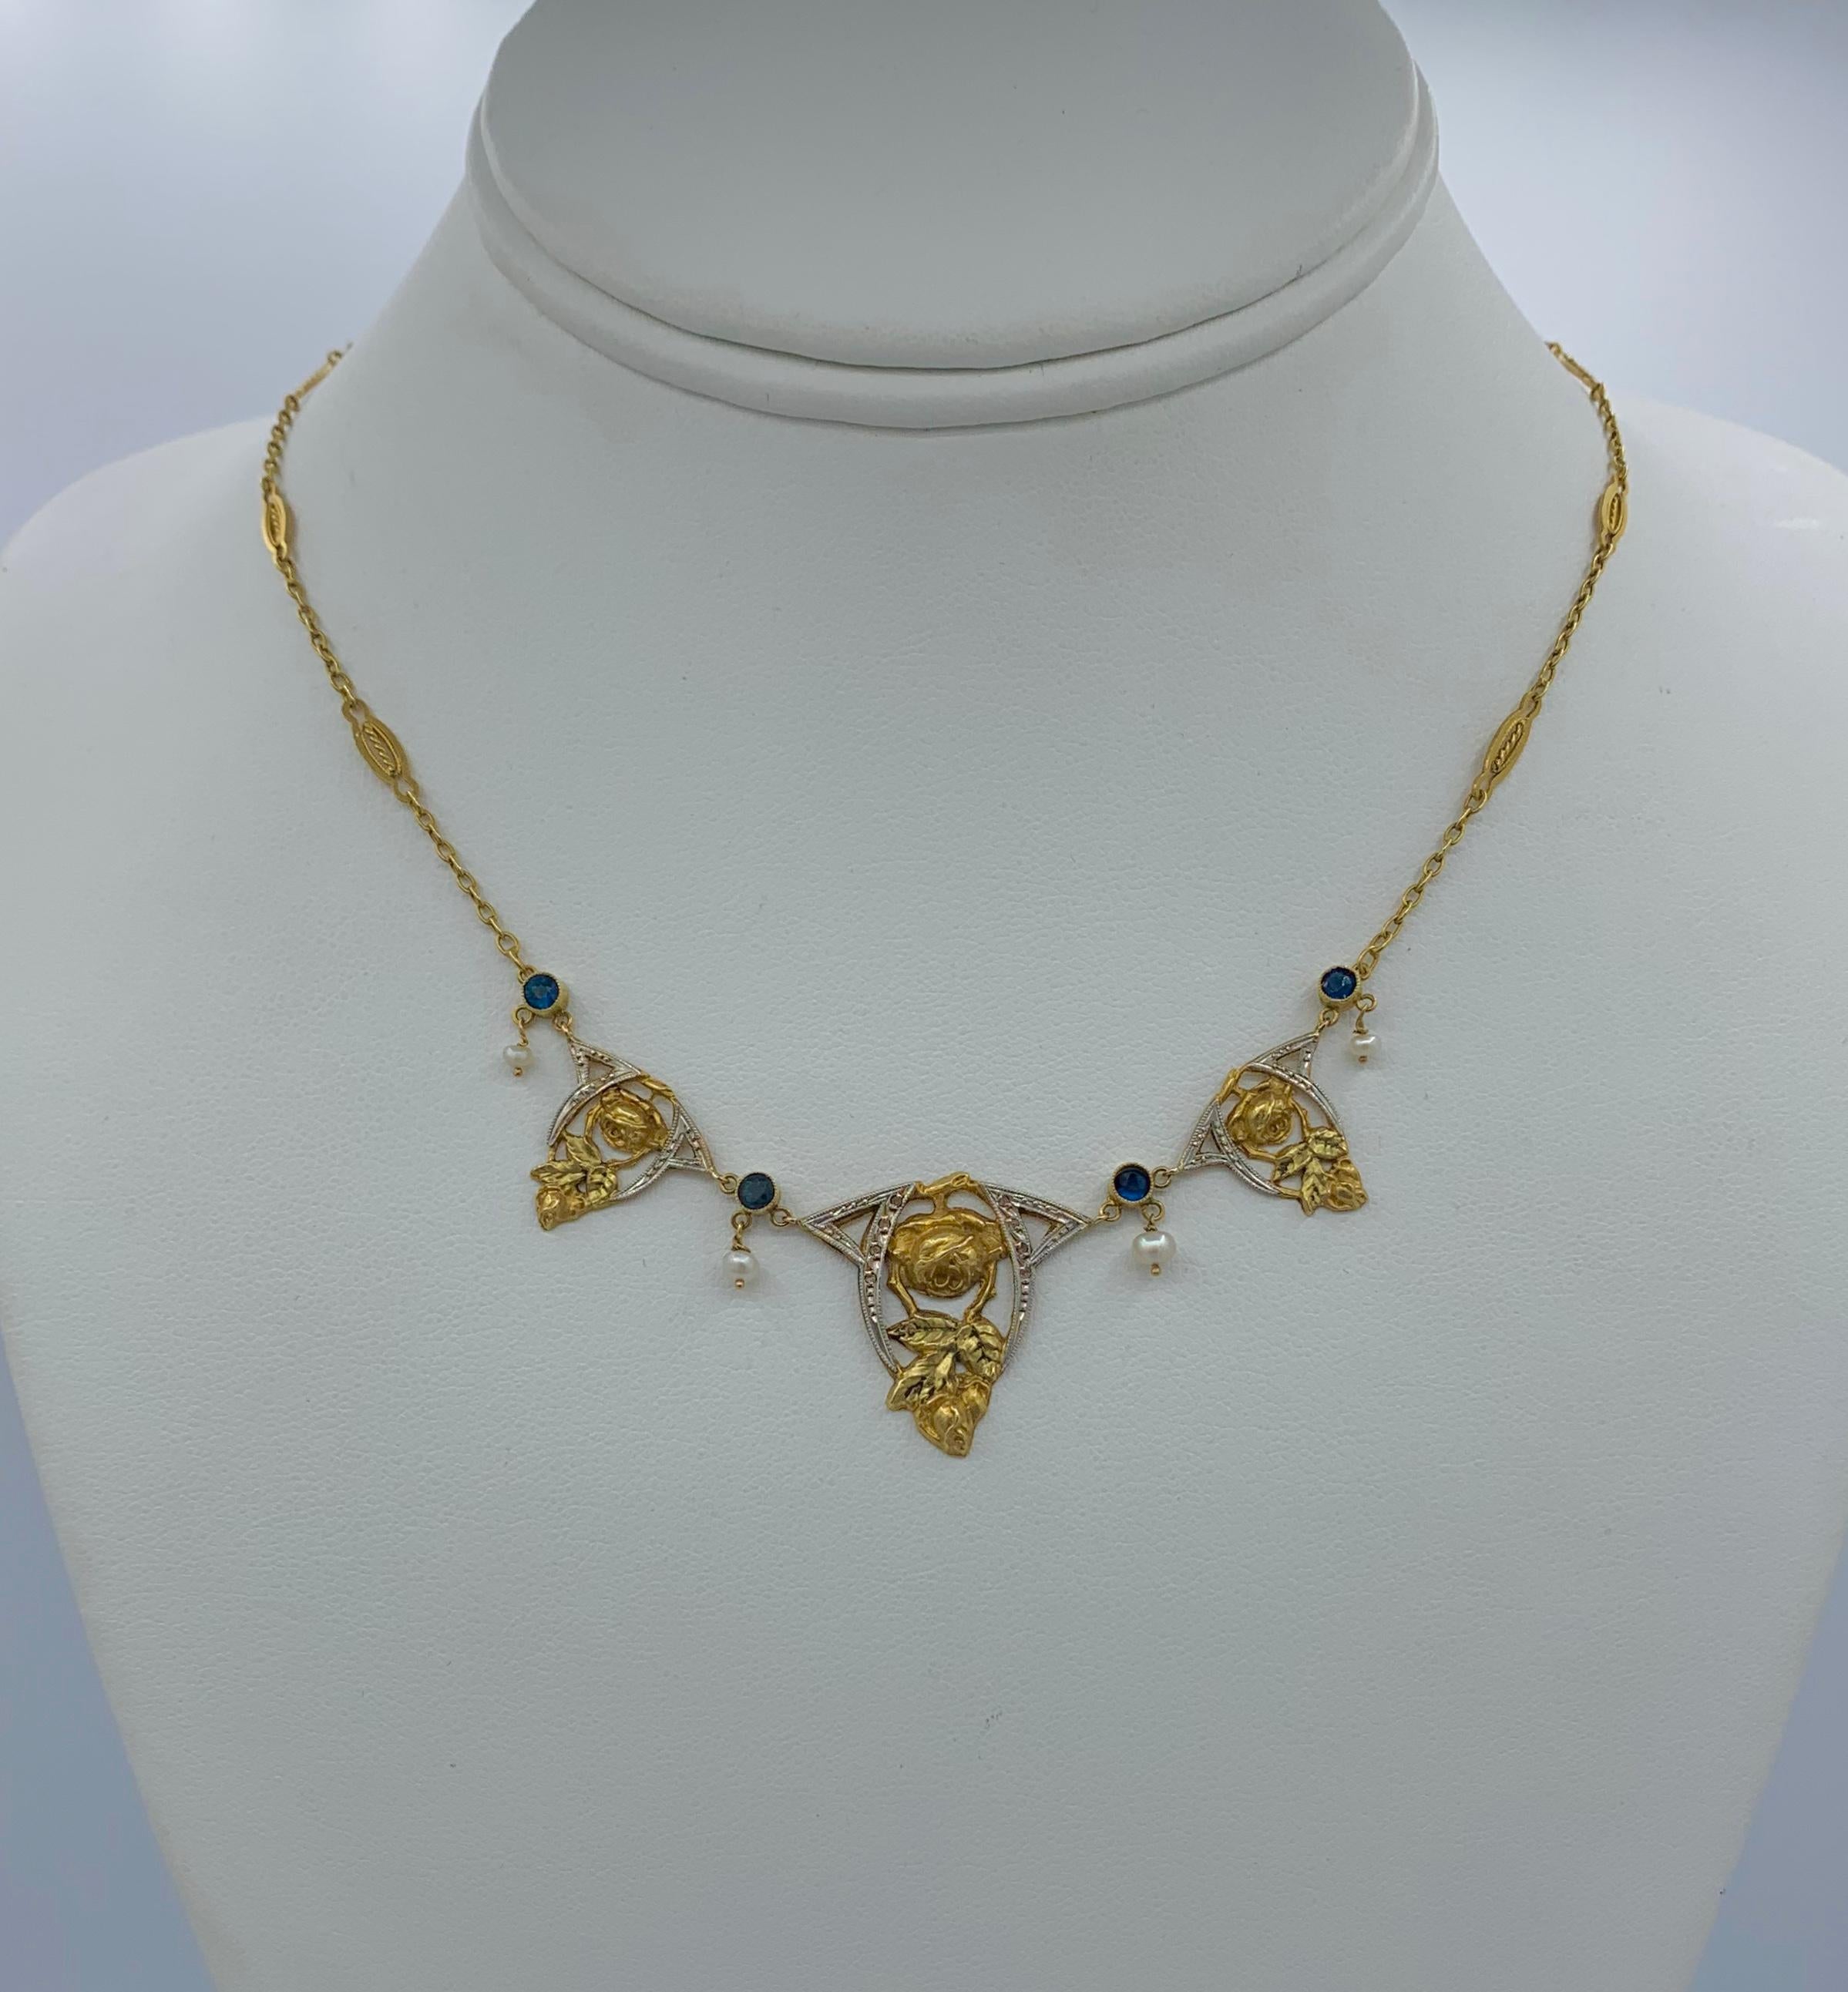 THIS IS A STUNNING SAPPHIRE AND PEARL MUSEUM QUALITY FRENCH BEAUX ARTS NAPOLEON III BELLE EPOQUE NECKLACE IN 18 KARAT GOLD.  THE GORGEOUS NECKLACE FROM FRANCE HAS A STUNNING ROSE FLOWER GARLAND OPEN WORK WREATH MOTIF DESIGN AND IS SET WITH ROUND